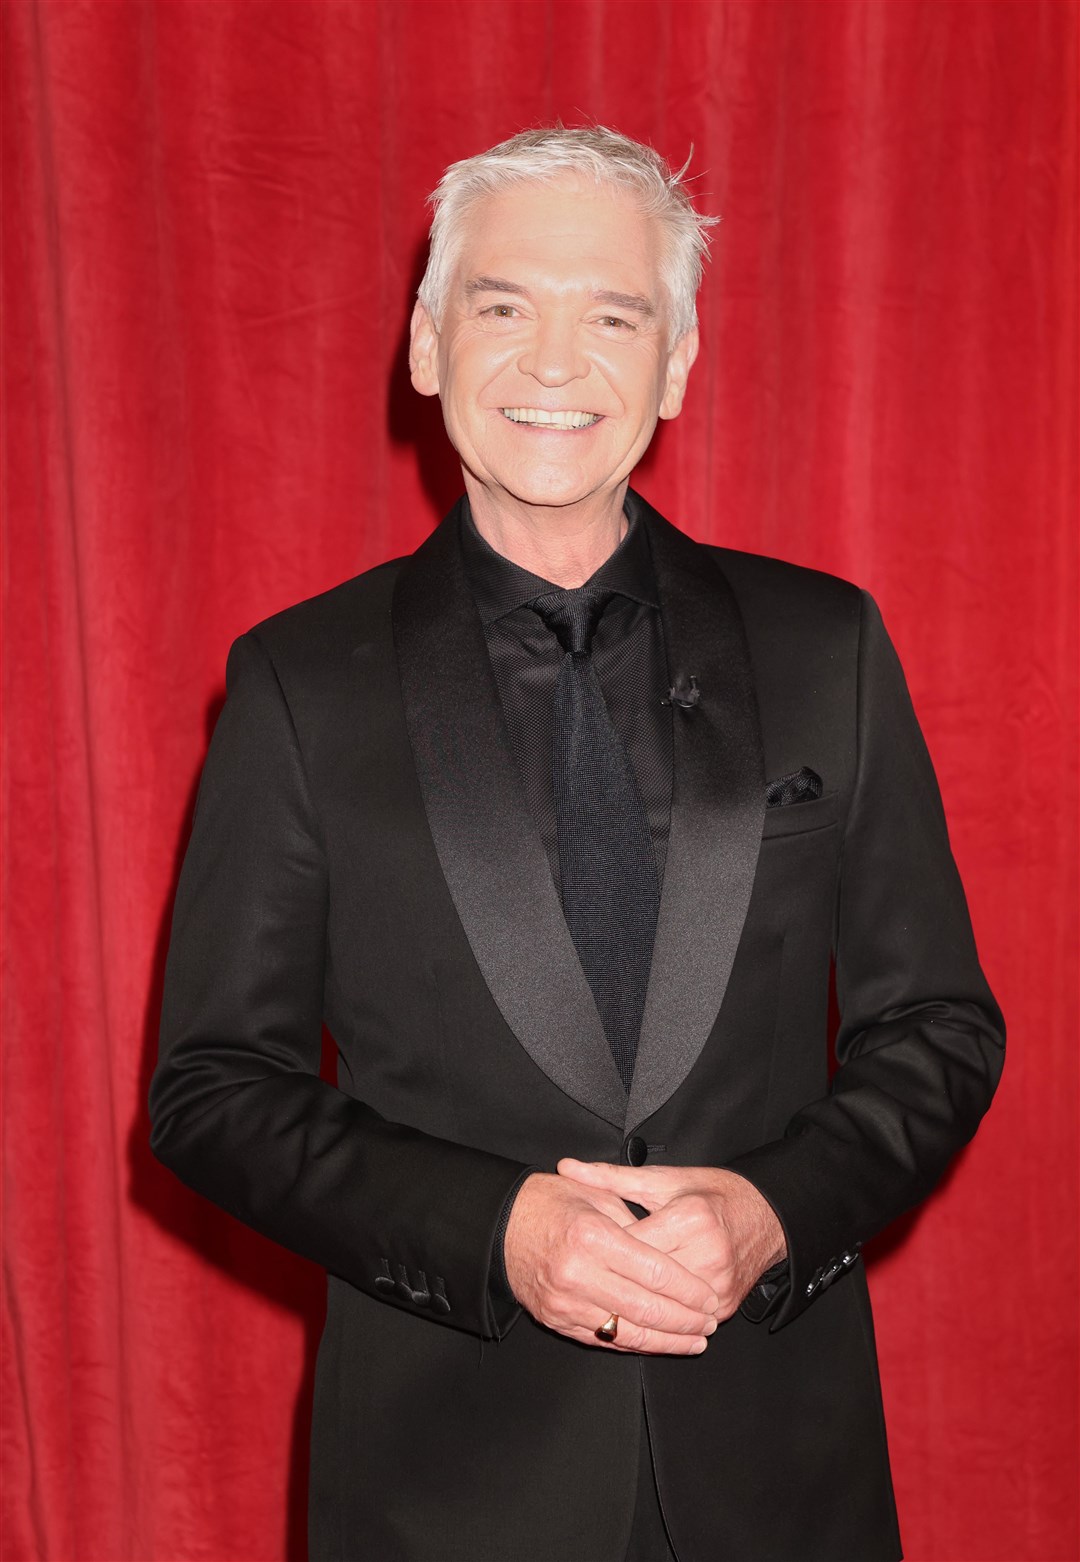 Phillip Schofield left ITV earlier this year (Suzan Moore/PA)